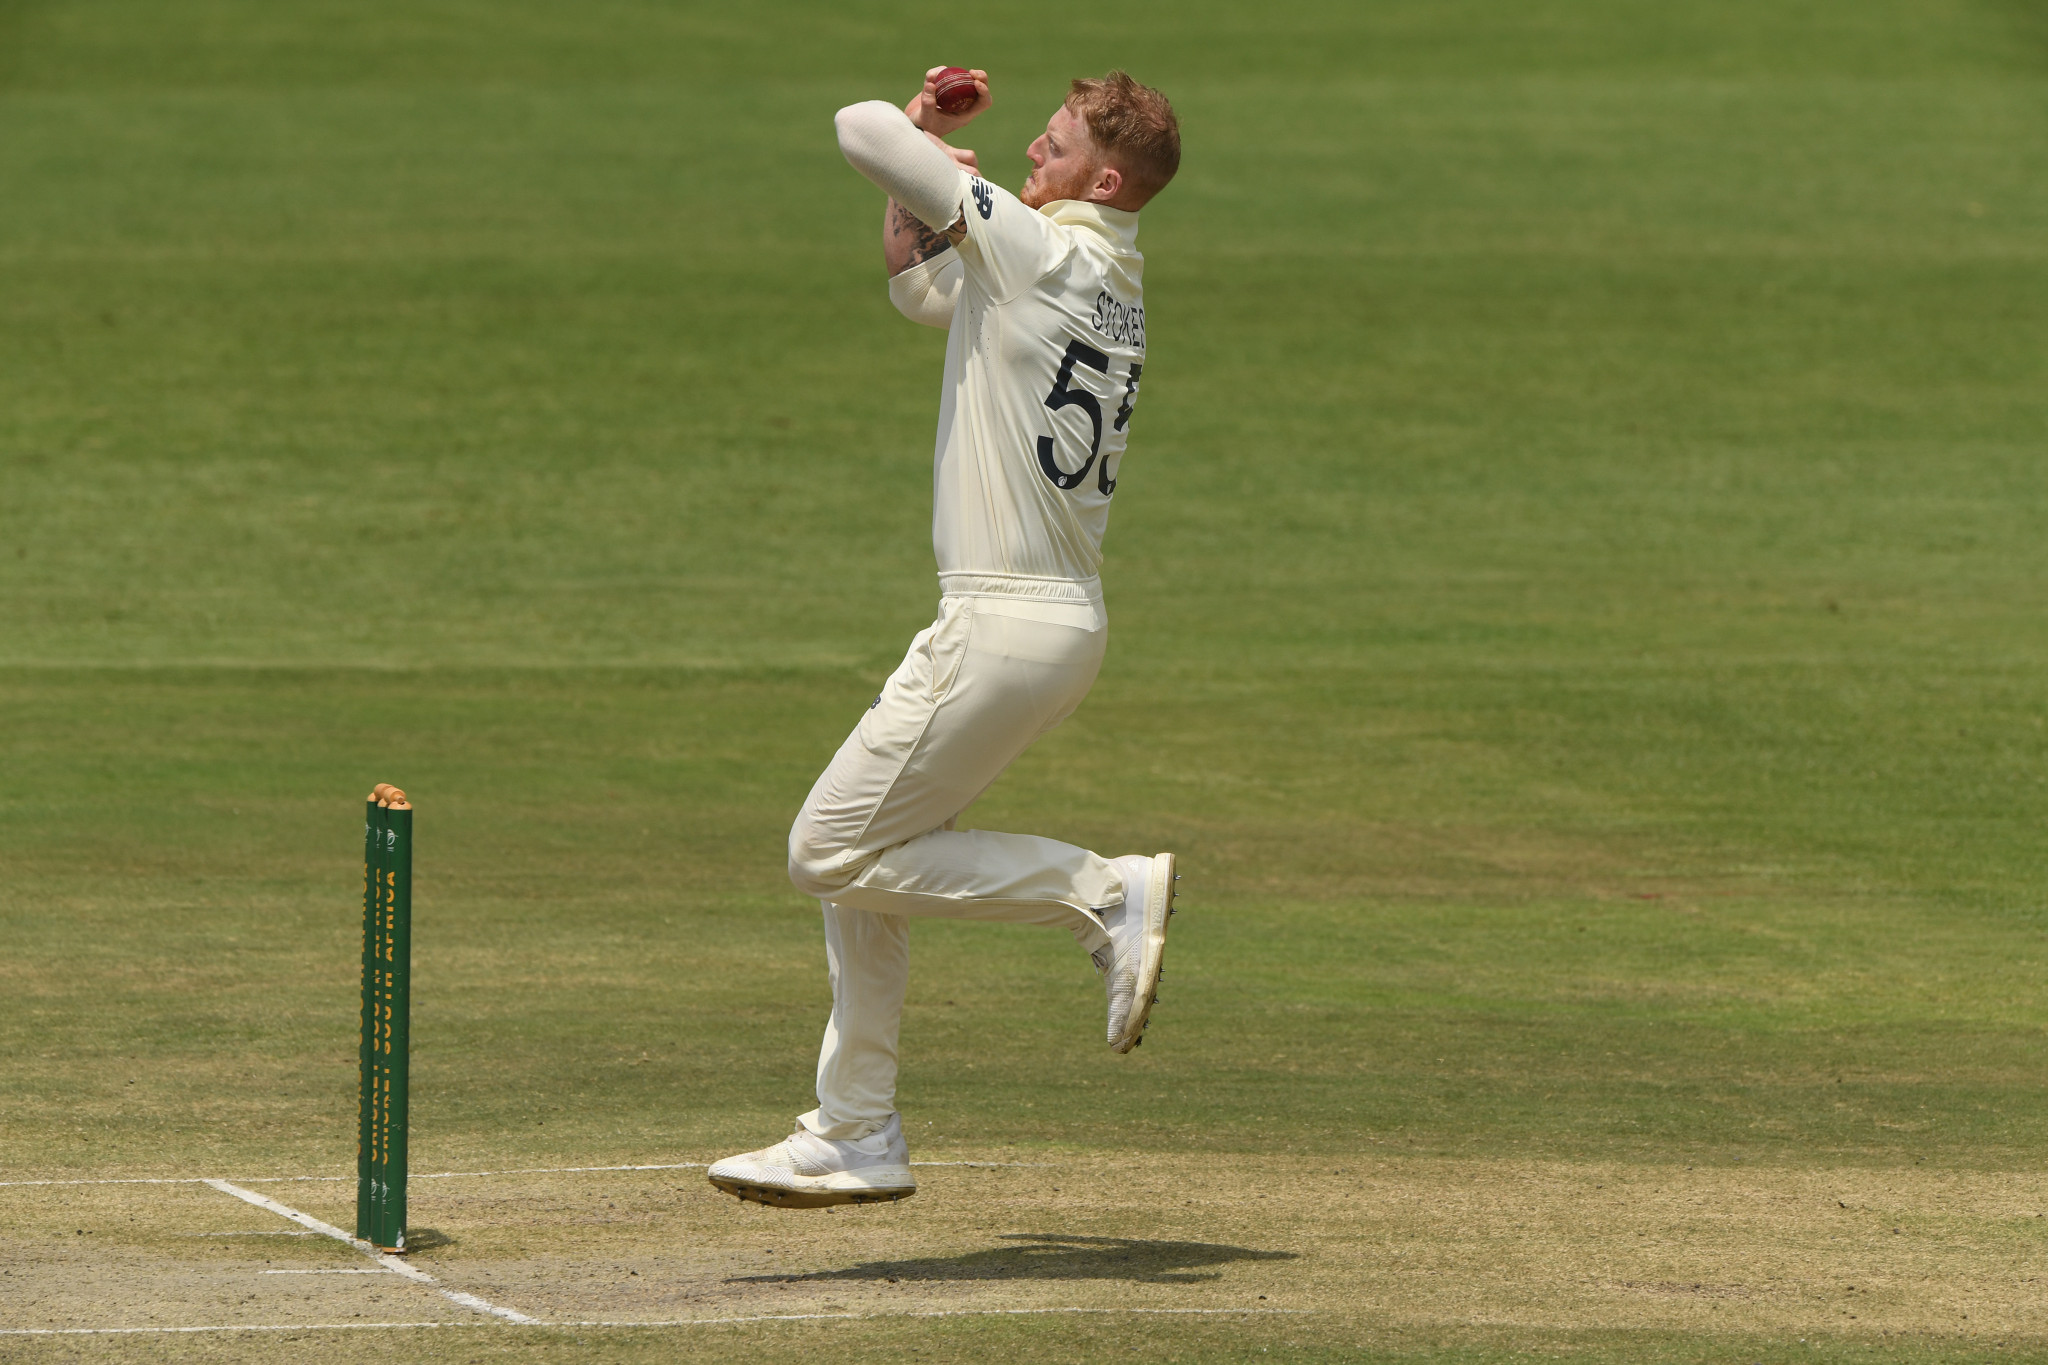 Ben Stokes won the main award at the BBC Sports Personality of the Year awards ©Getty Images